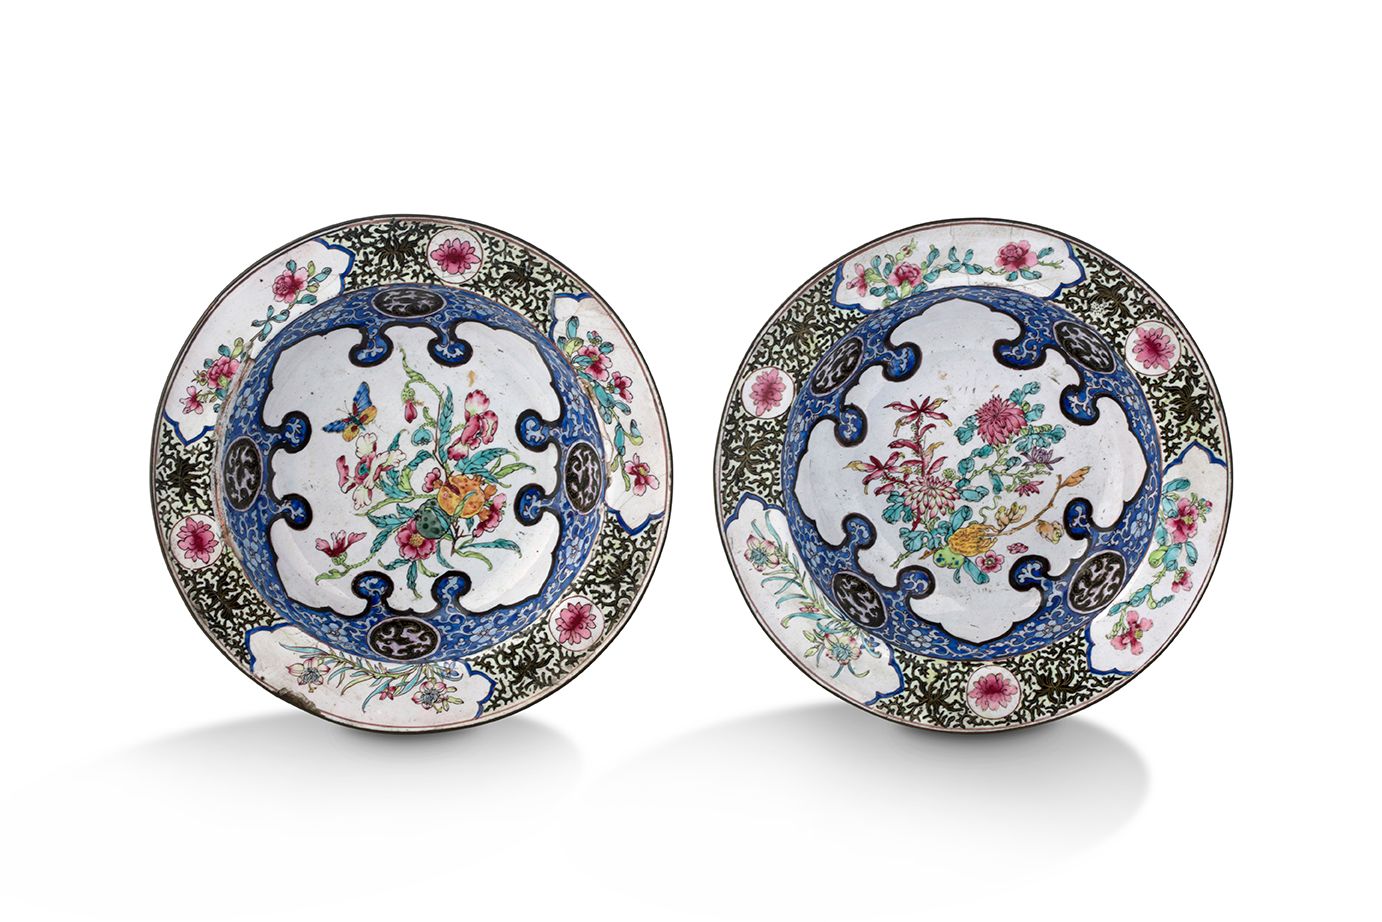 CHINE DYNASTIE QING, XVIIIe SIÈCLE Pair of small dishes
In painted enamel on cop&hellip;